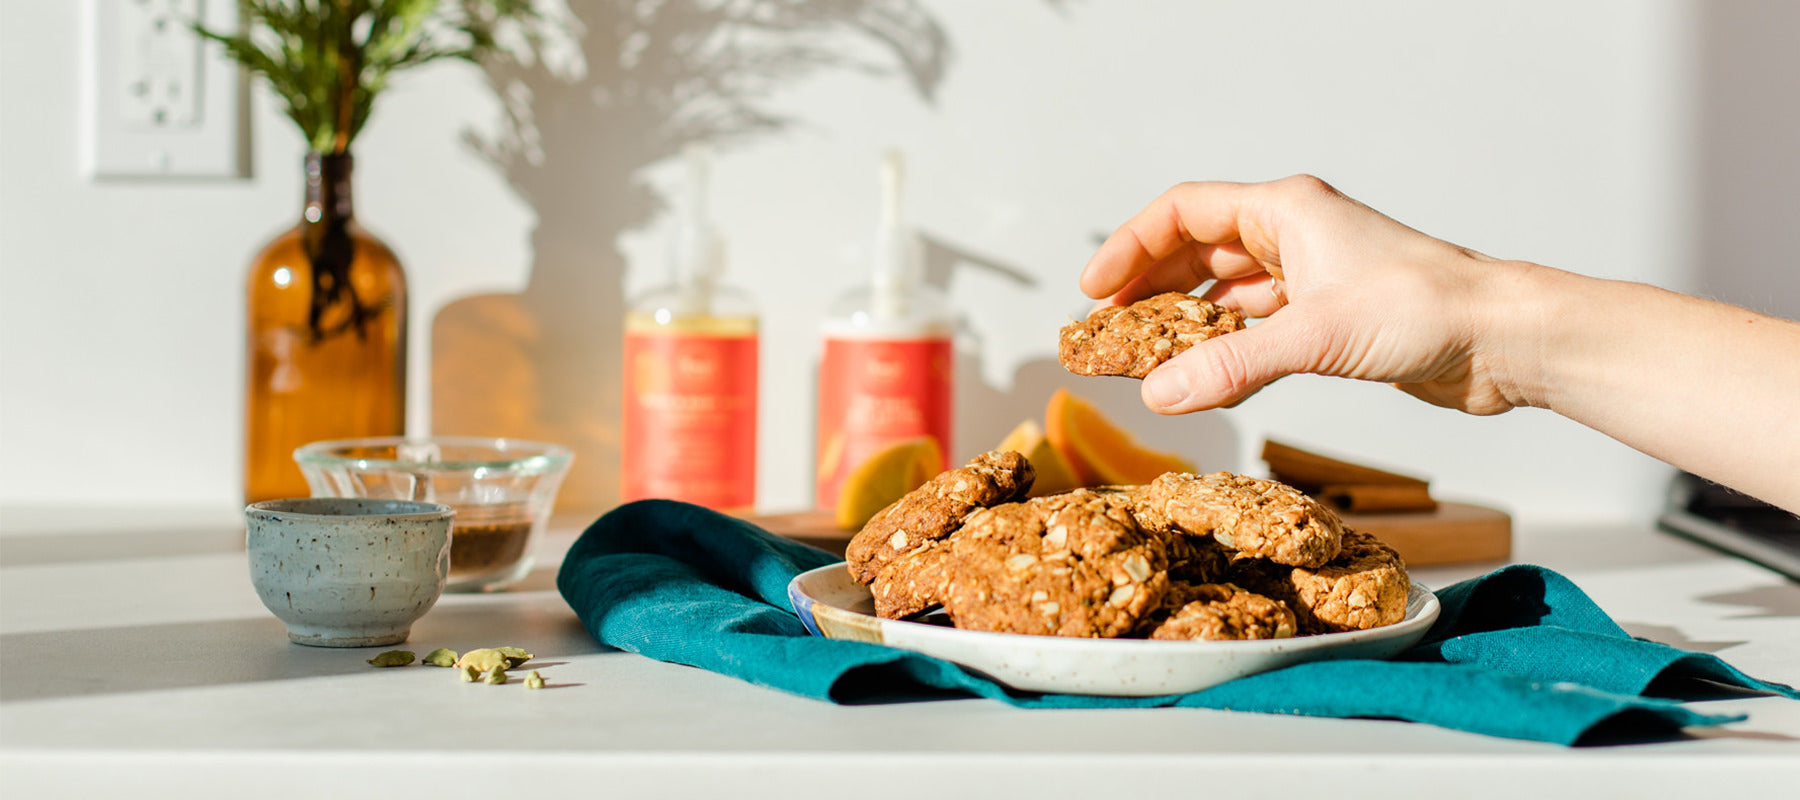 a hand is taking a cookie from a pile on the counter. This holiday cookie recipe is vegan, can be easily made gluten free, is perfect for holiday potluck desserts and is inspired by our Orange Cardamom holiday scent. 